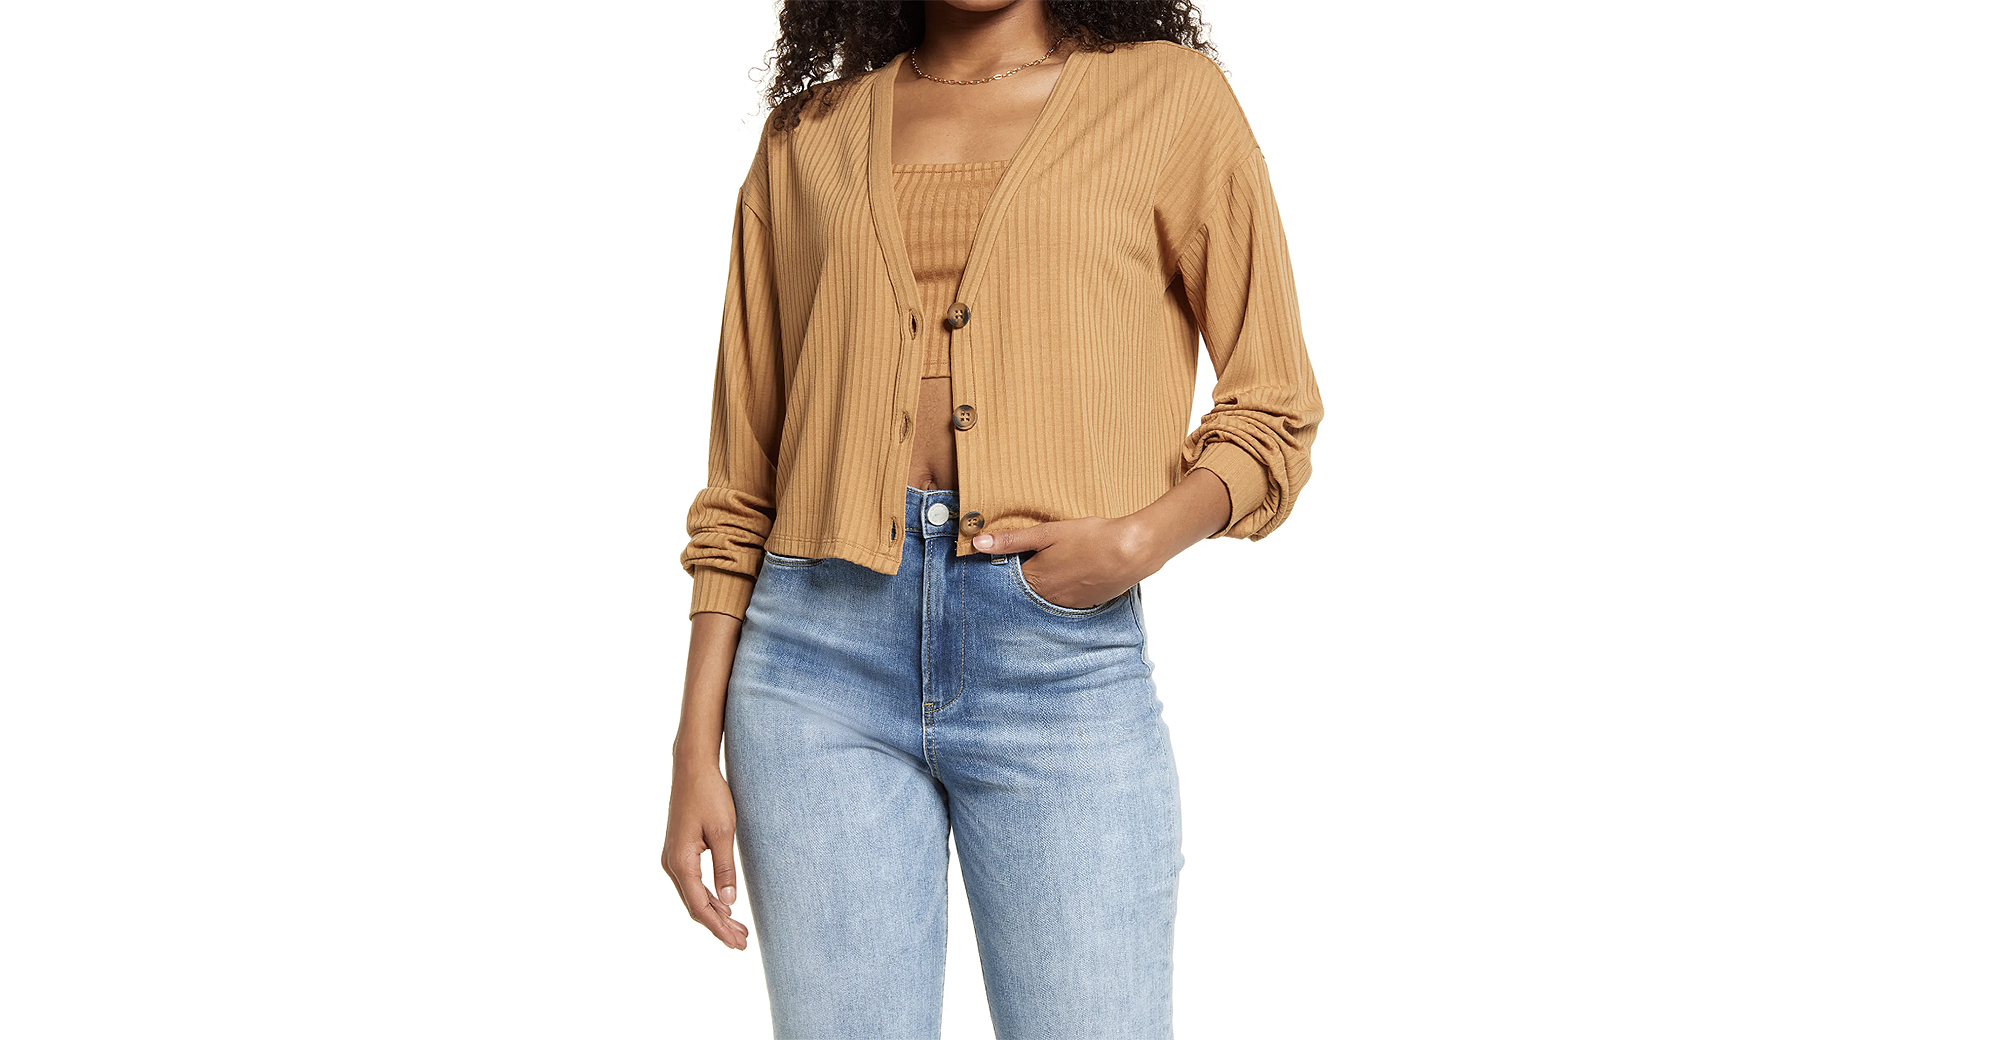 Vero Moda Stretchy Cardigan Is Off at Nordstrom